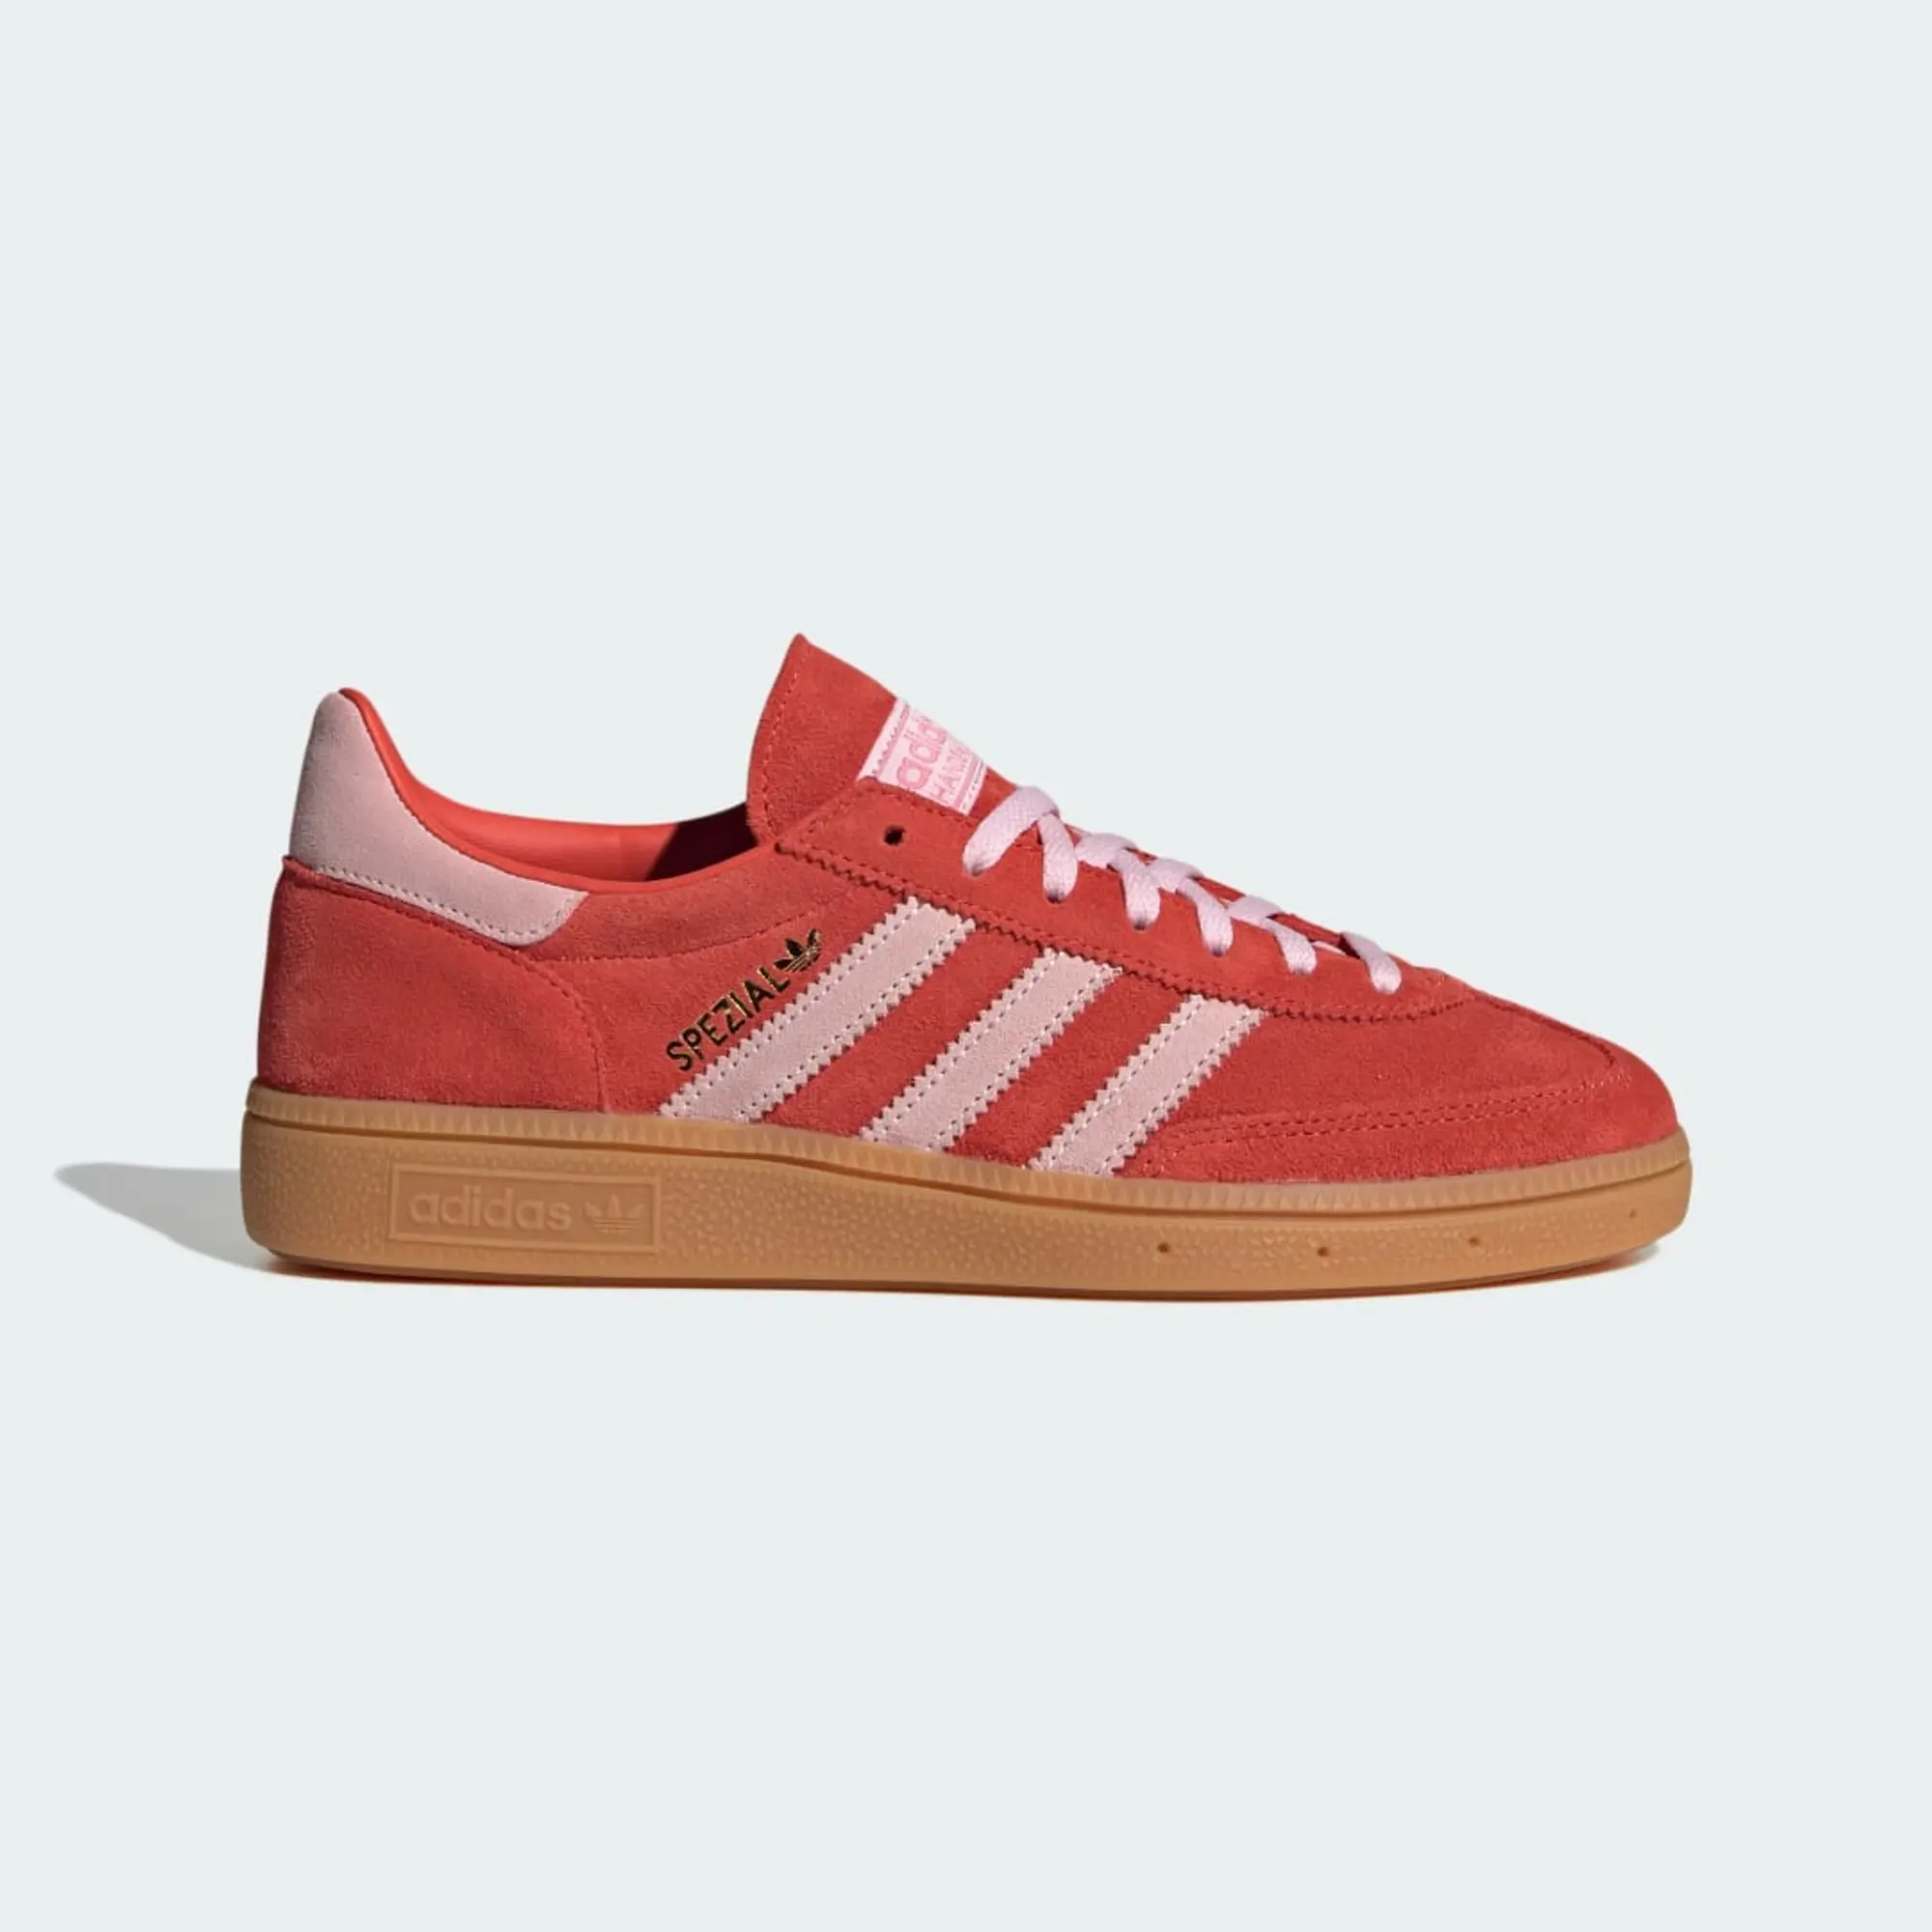 adidas Handball Spezial Womens Bright Red Clear Pink Shoes